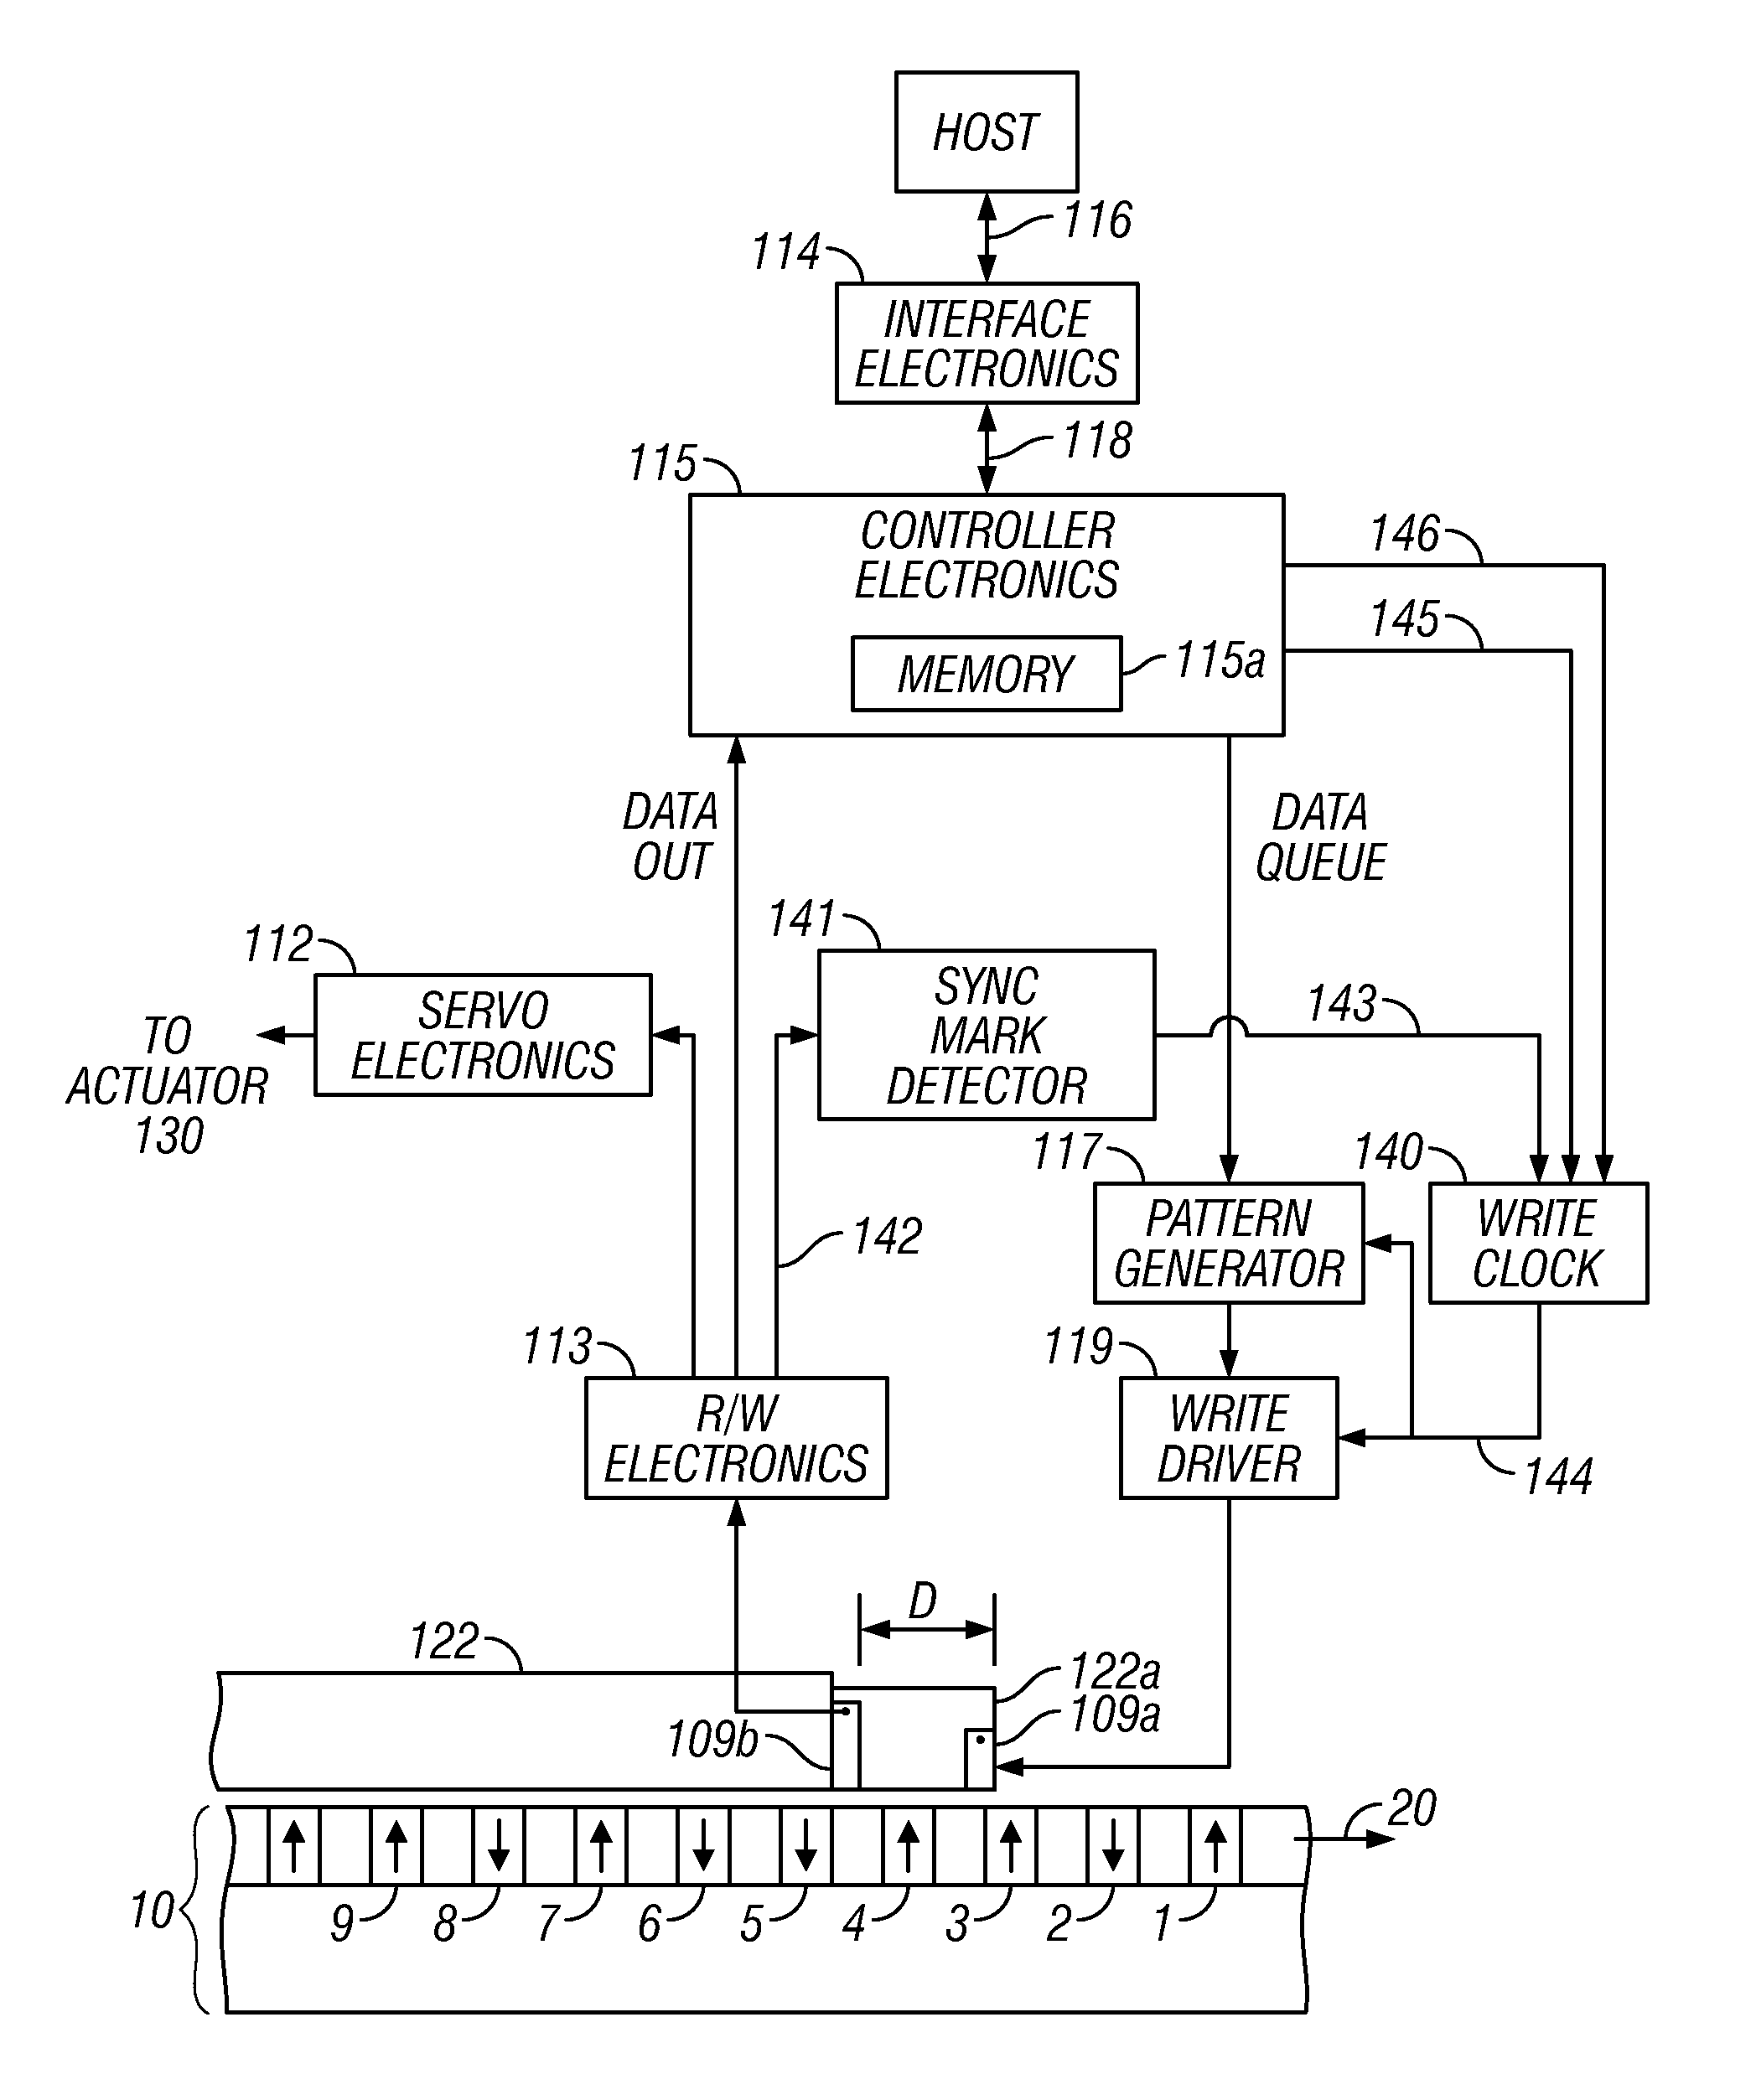 Patterned-media magnetic recording disk drive with data island misplacement information in the servo sectors